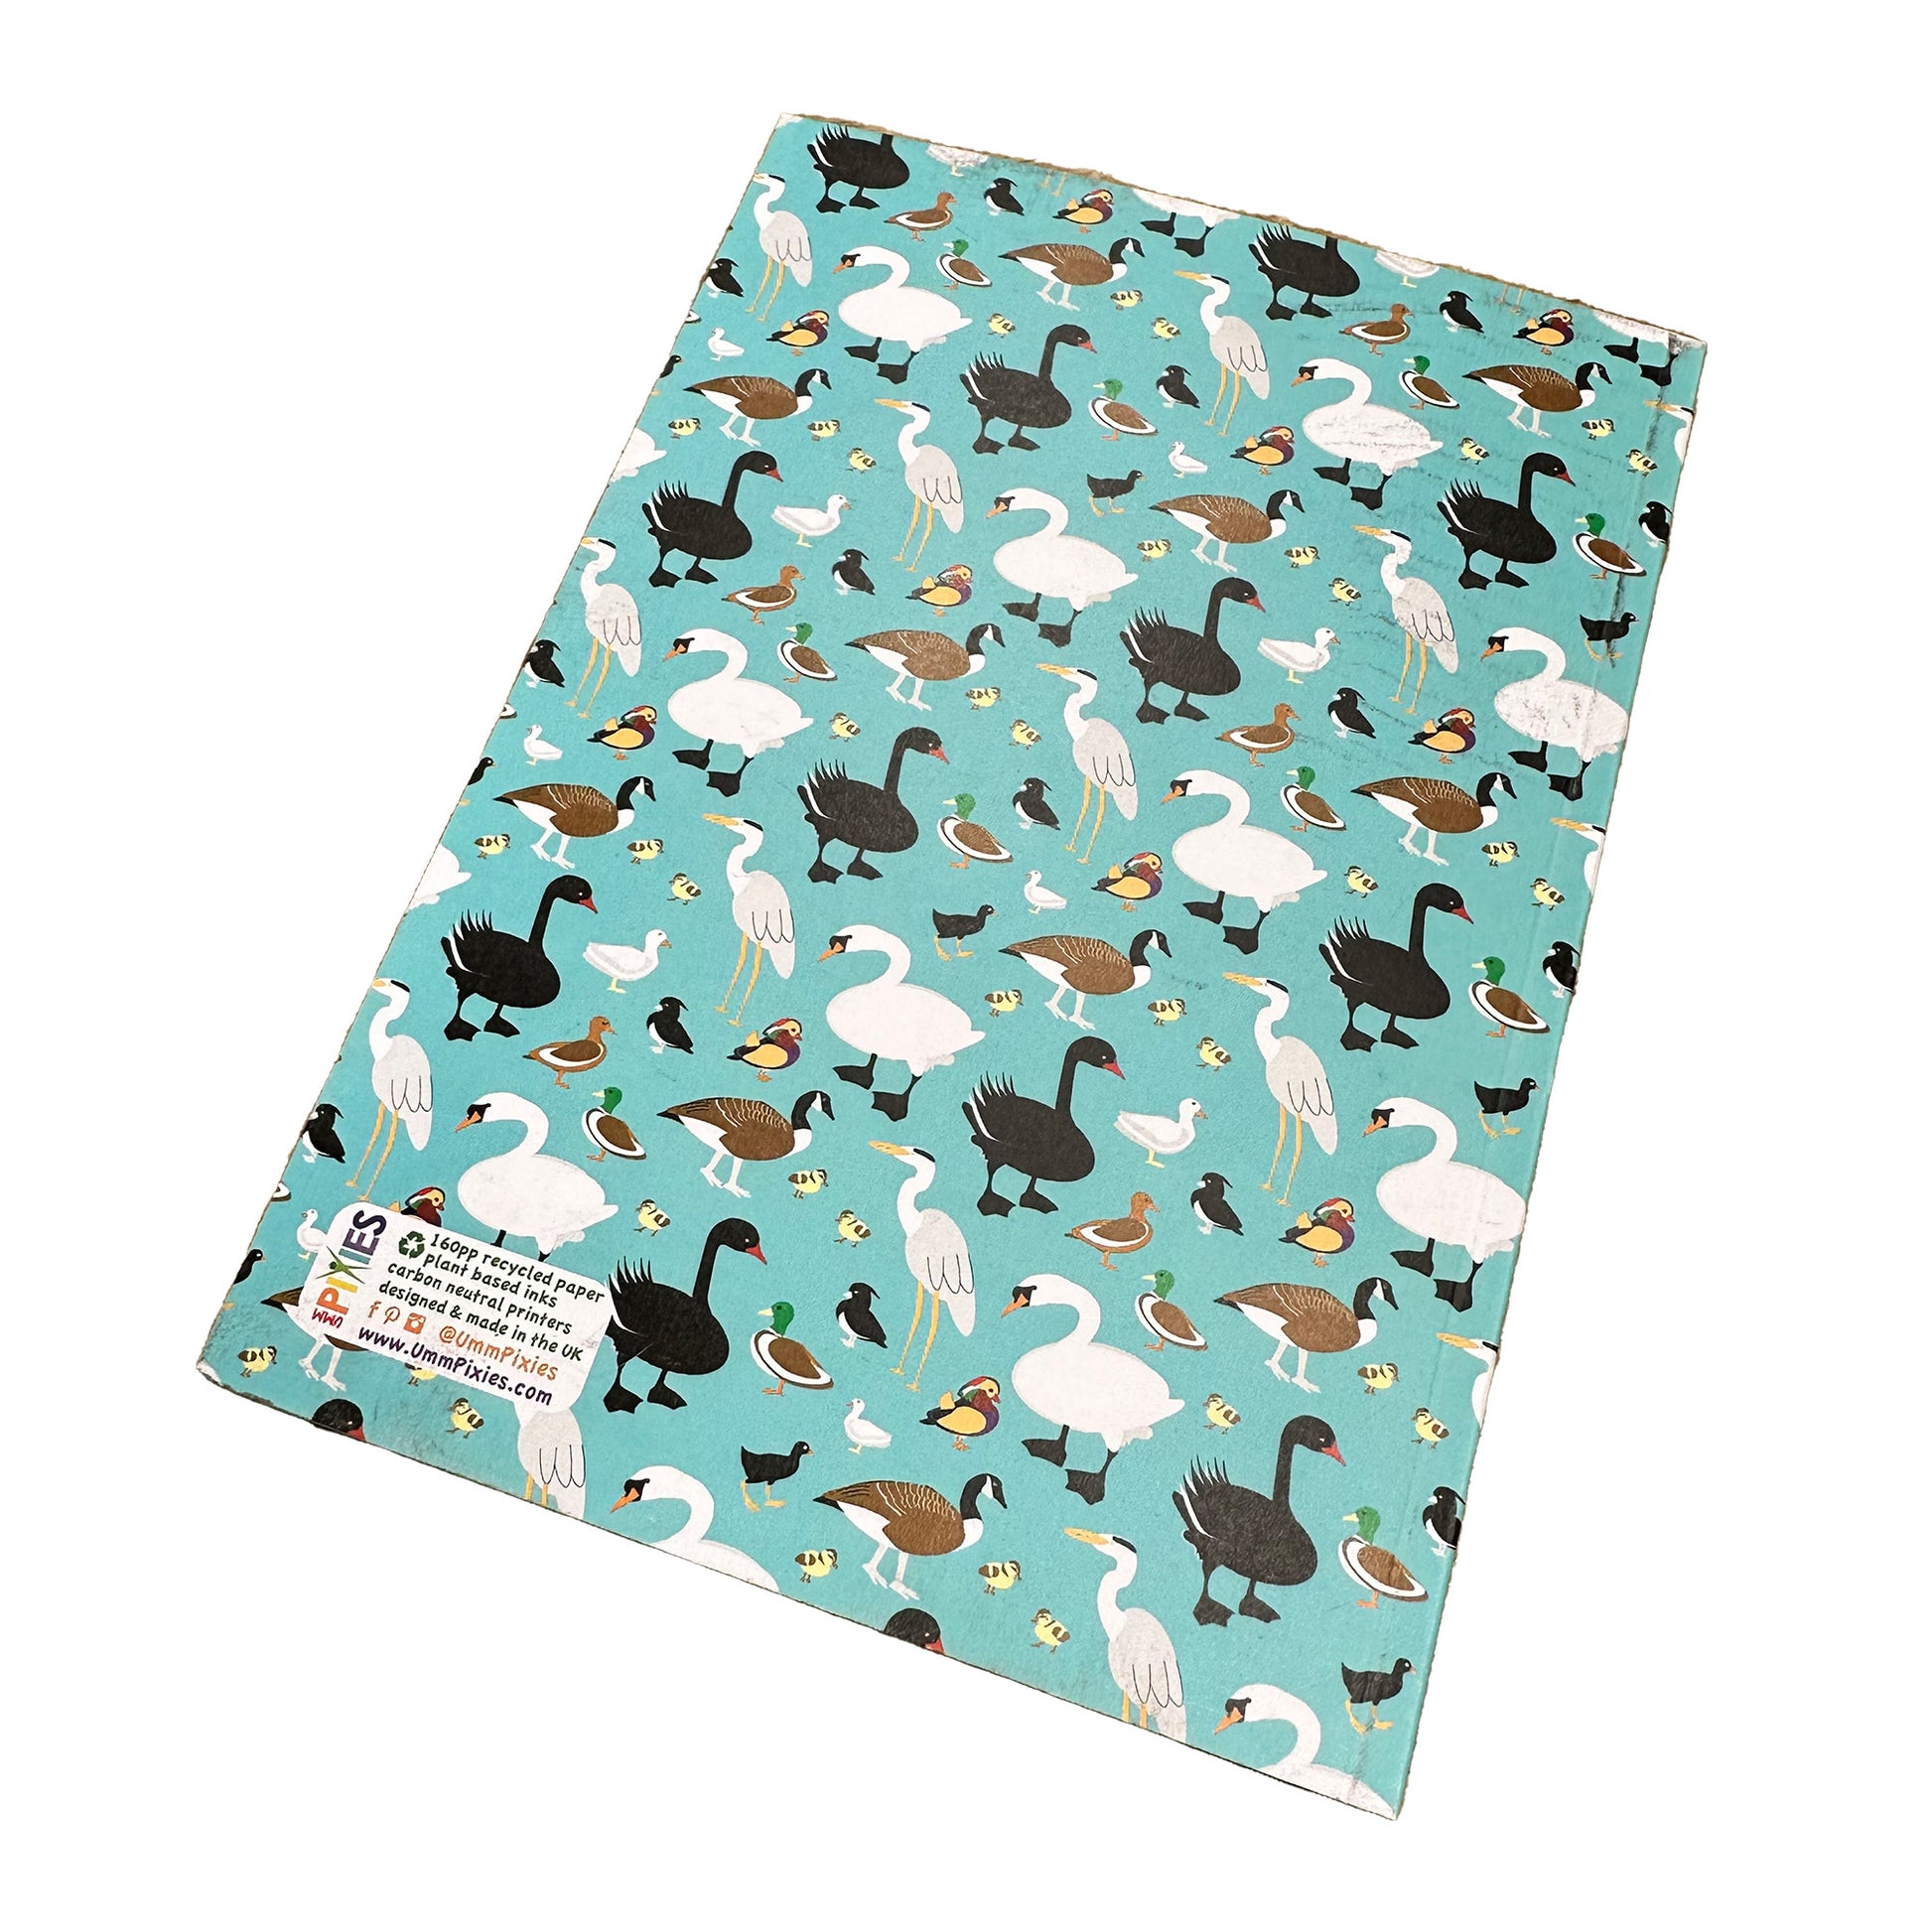 Back cover of the Ducks notebook, 160 page plain and ruled journal with duck design cover from ummPixies